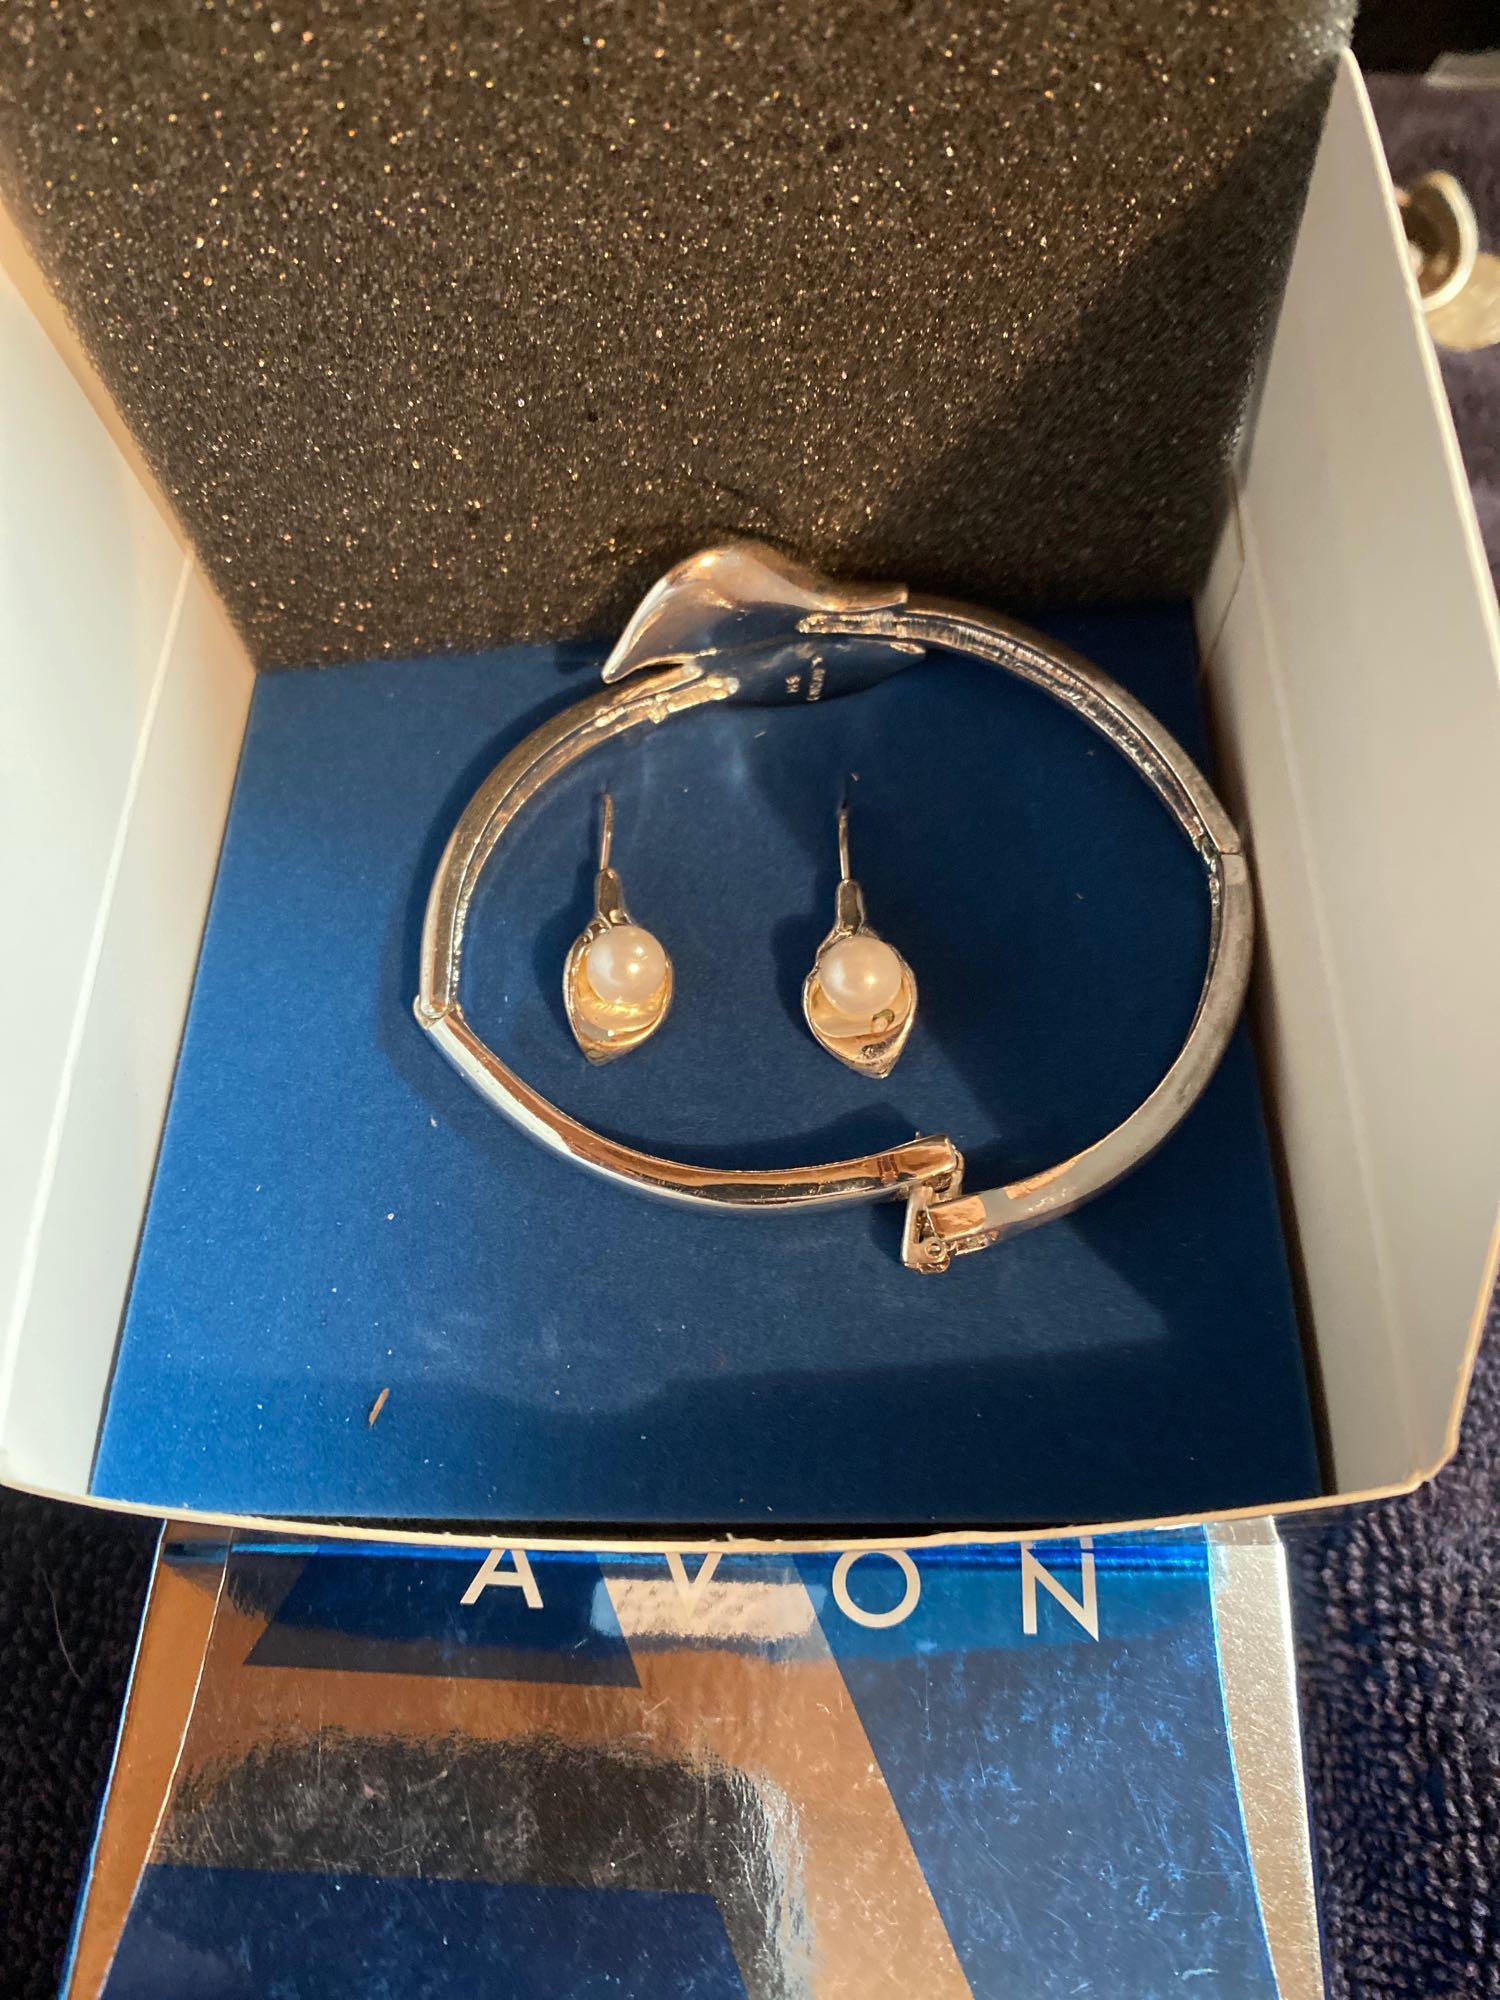 3 sets of Avon new old stock jewelry in boxes